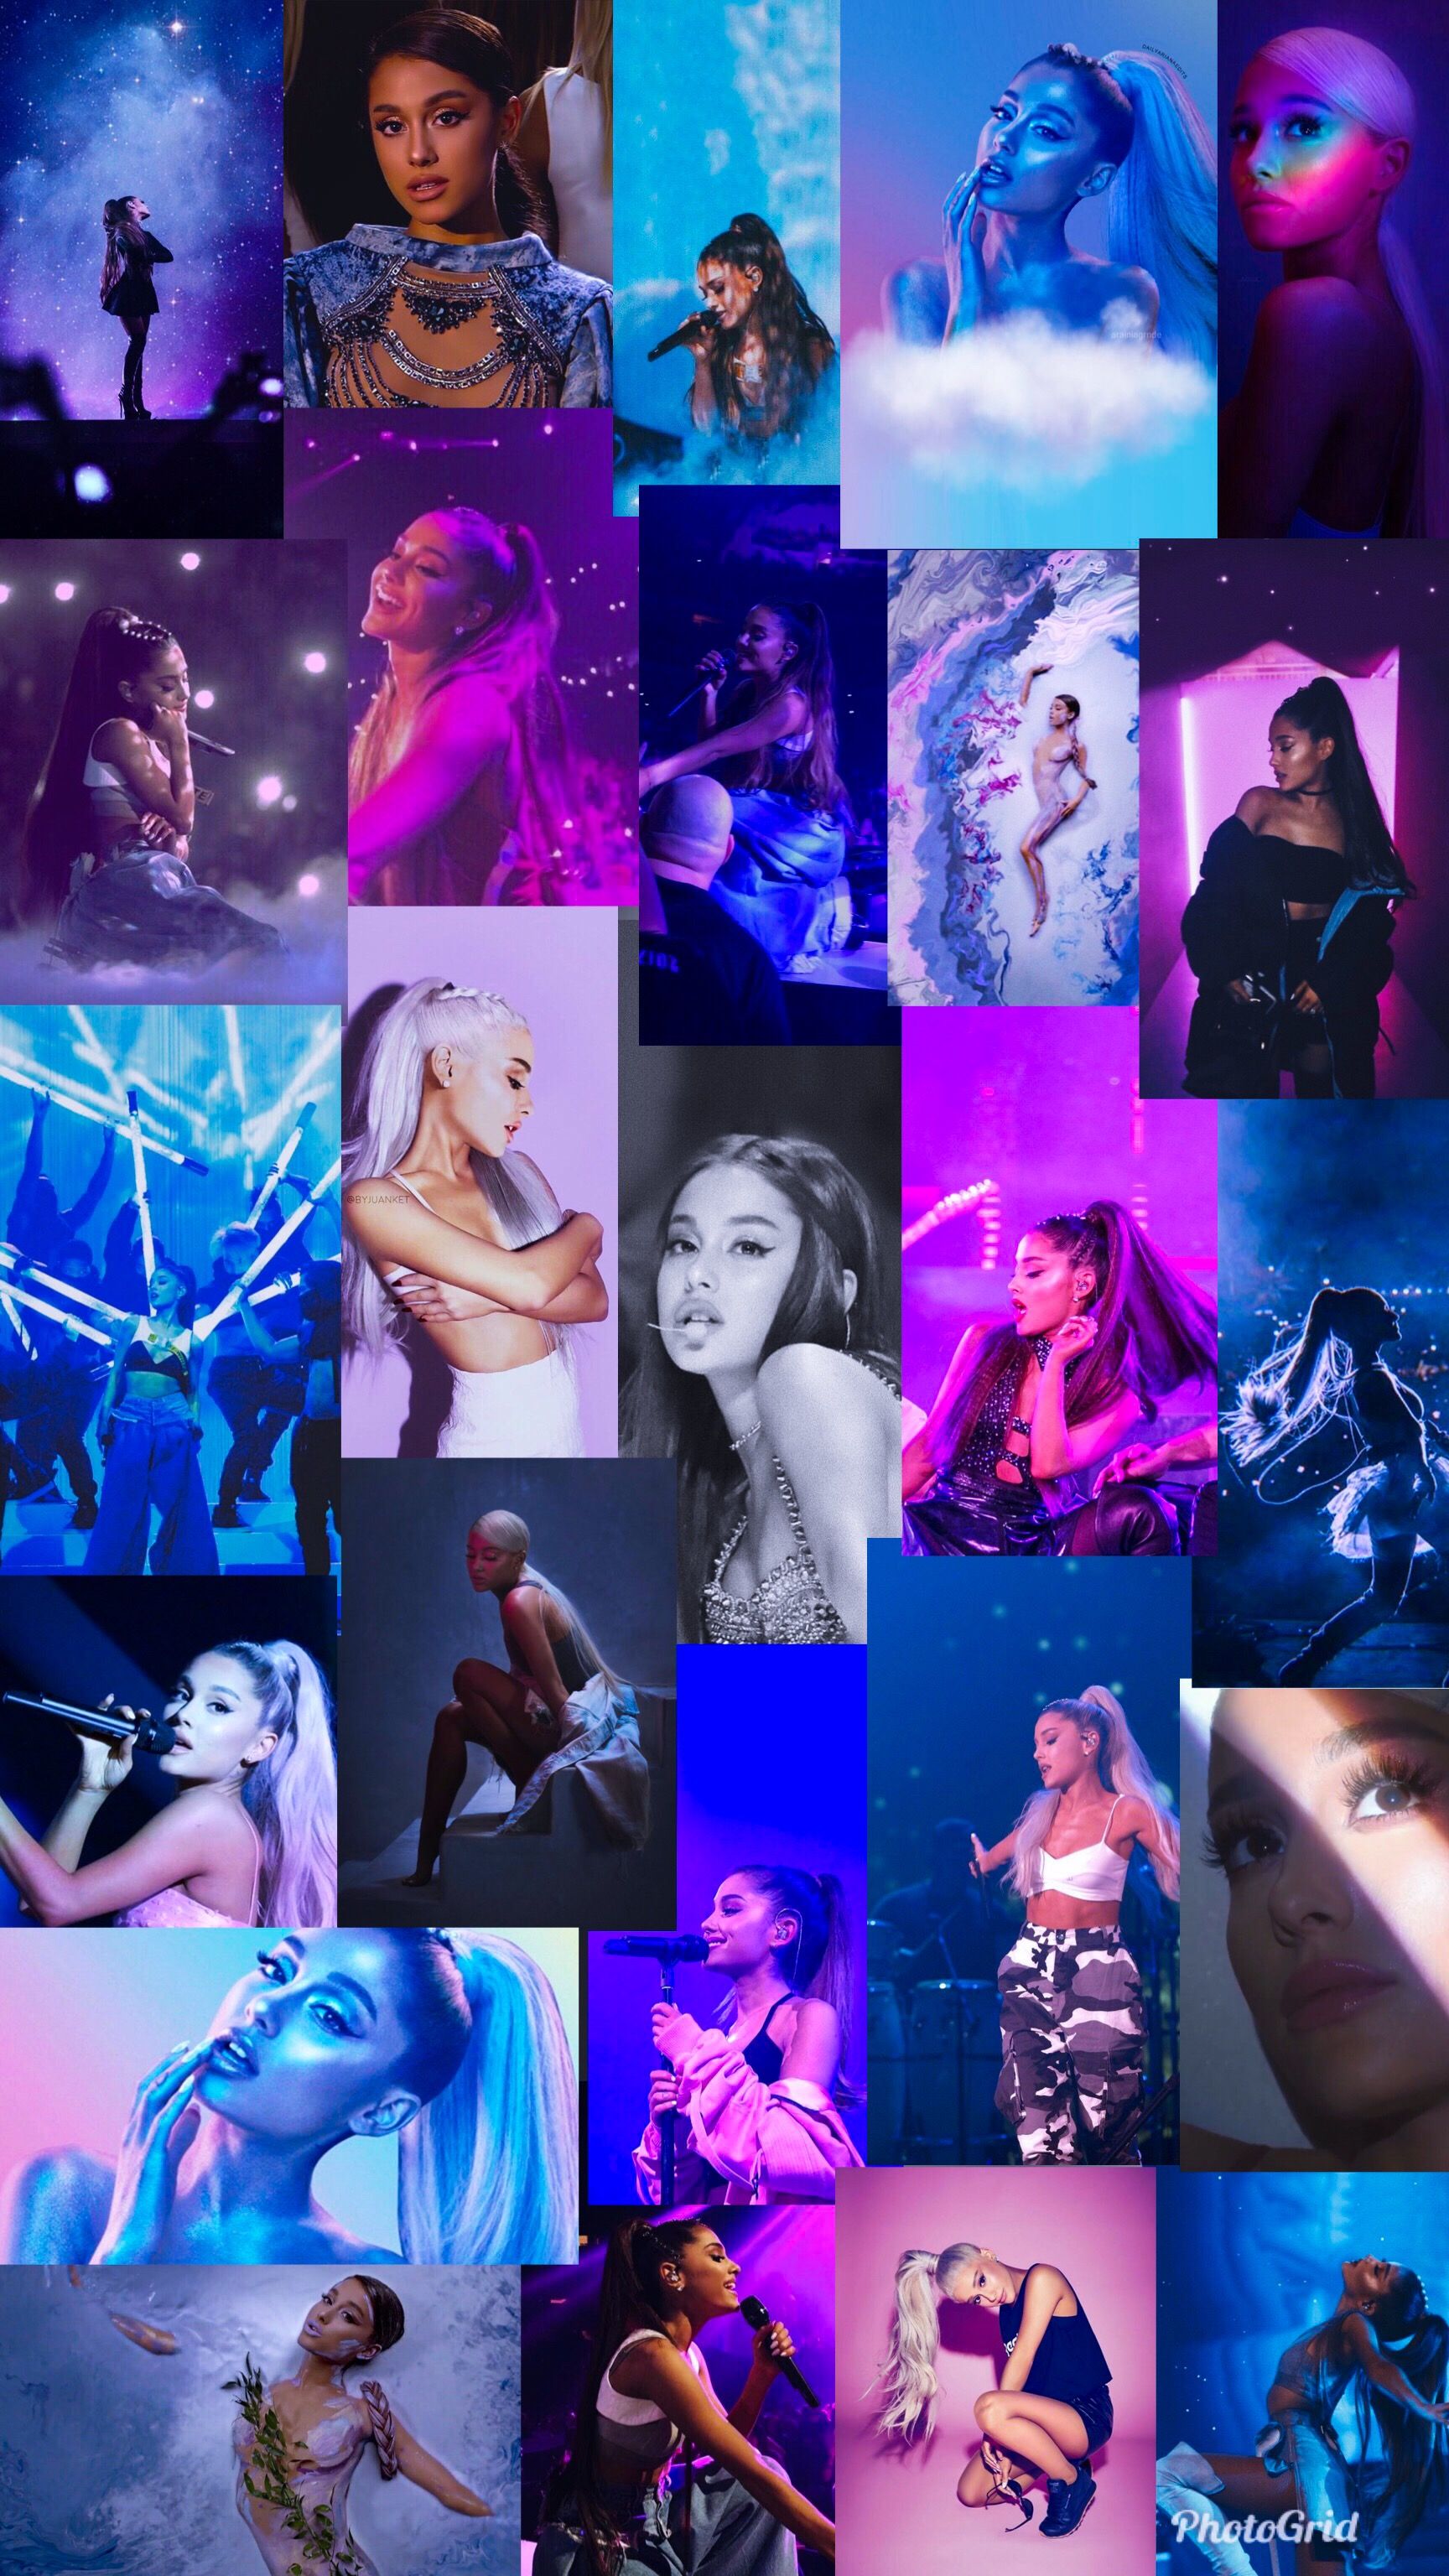 Pin By Joey On Collage Wallpaper. Ariana Grande Wallpaper, Ariana Grande Background, Ariana Grande Album